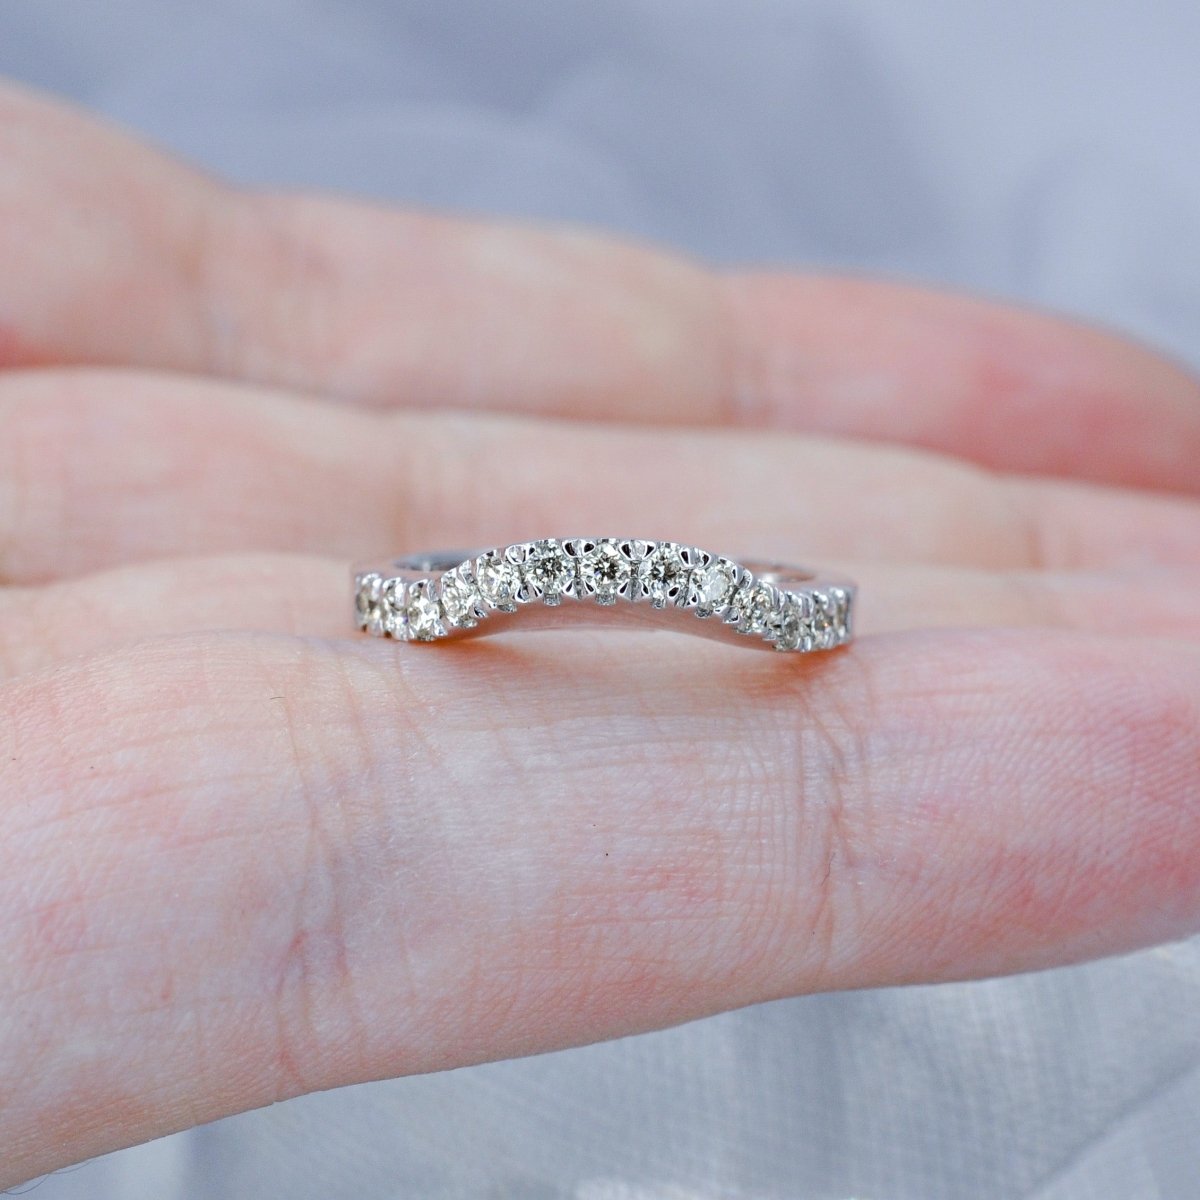 Special 0.30 CT Round Cut Diamond Wedding Ring in 14KT White Gold PSRI1327 - Primestyle.com